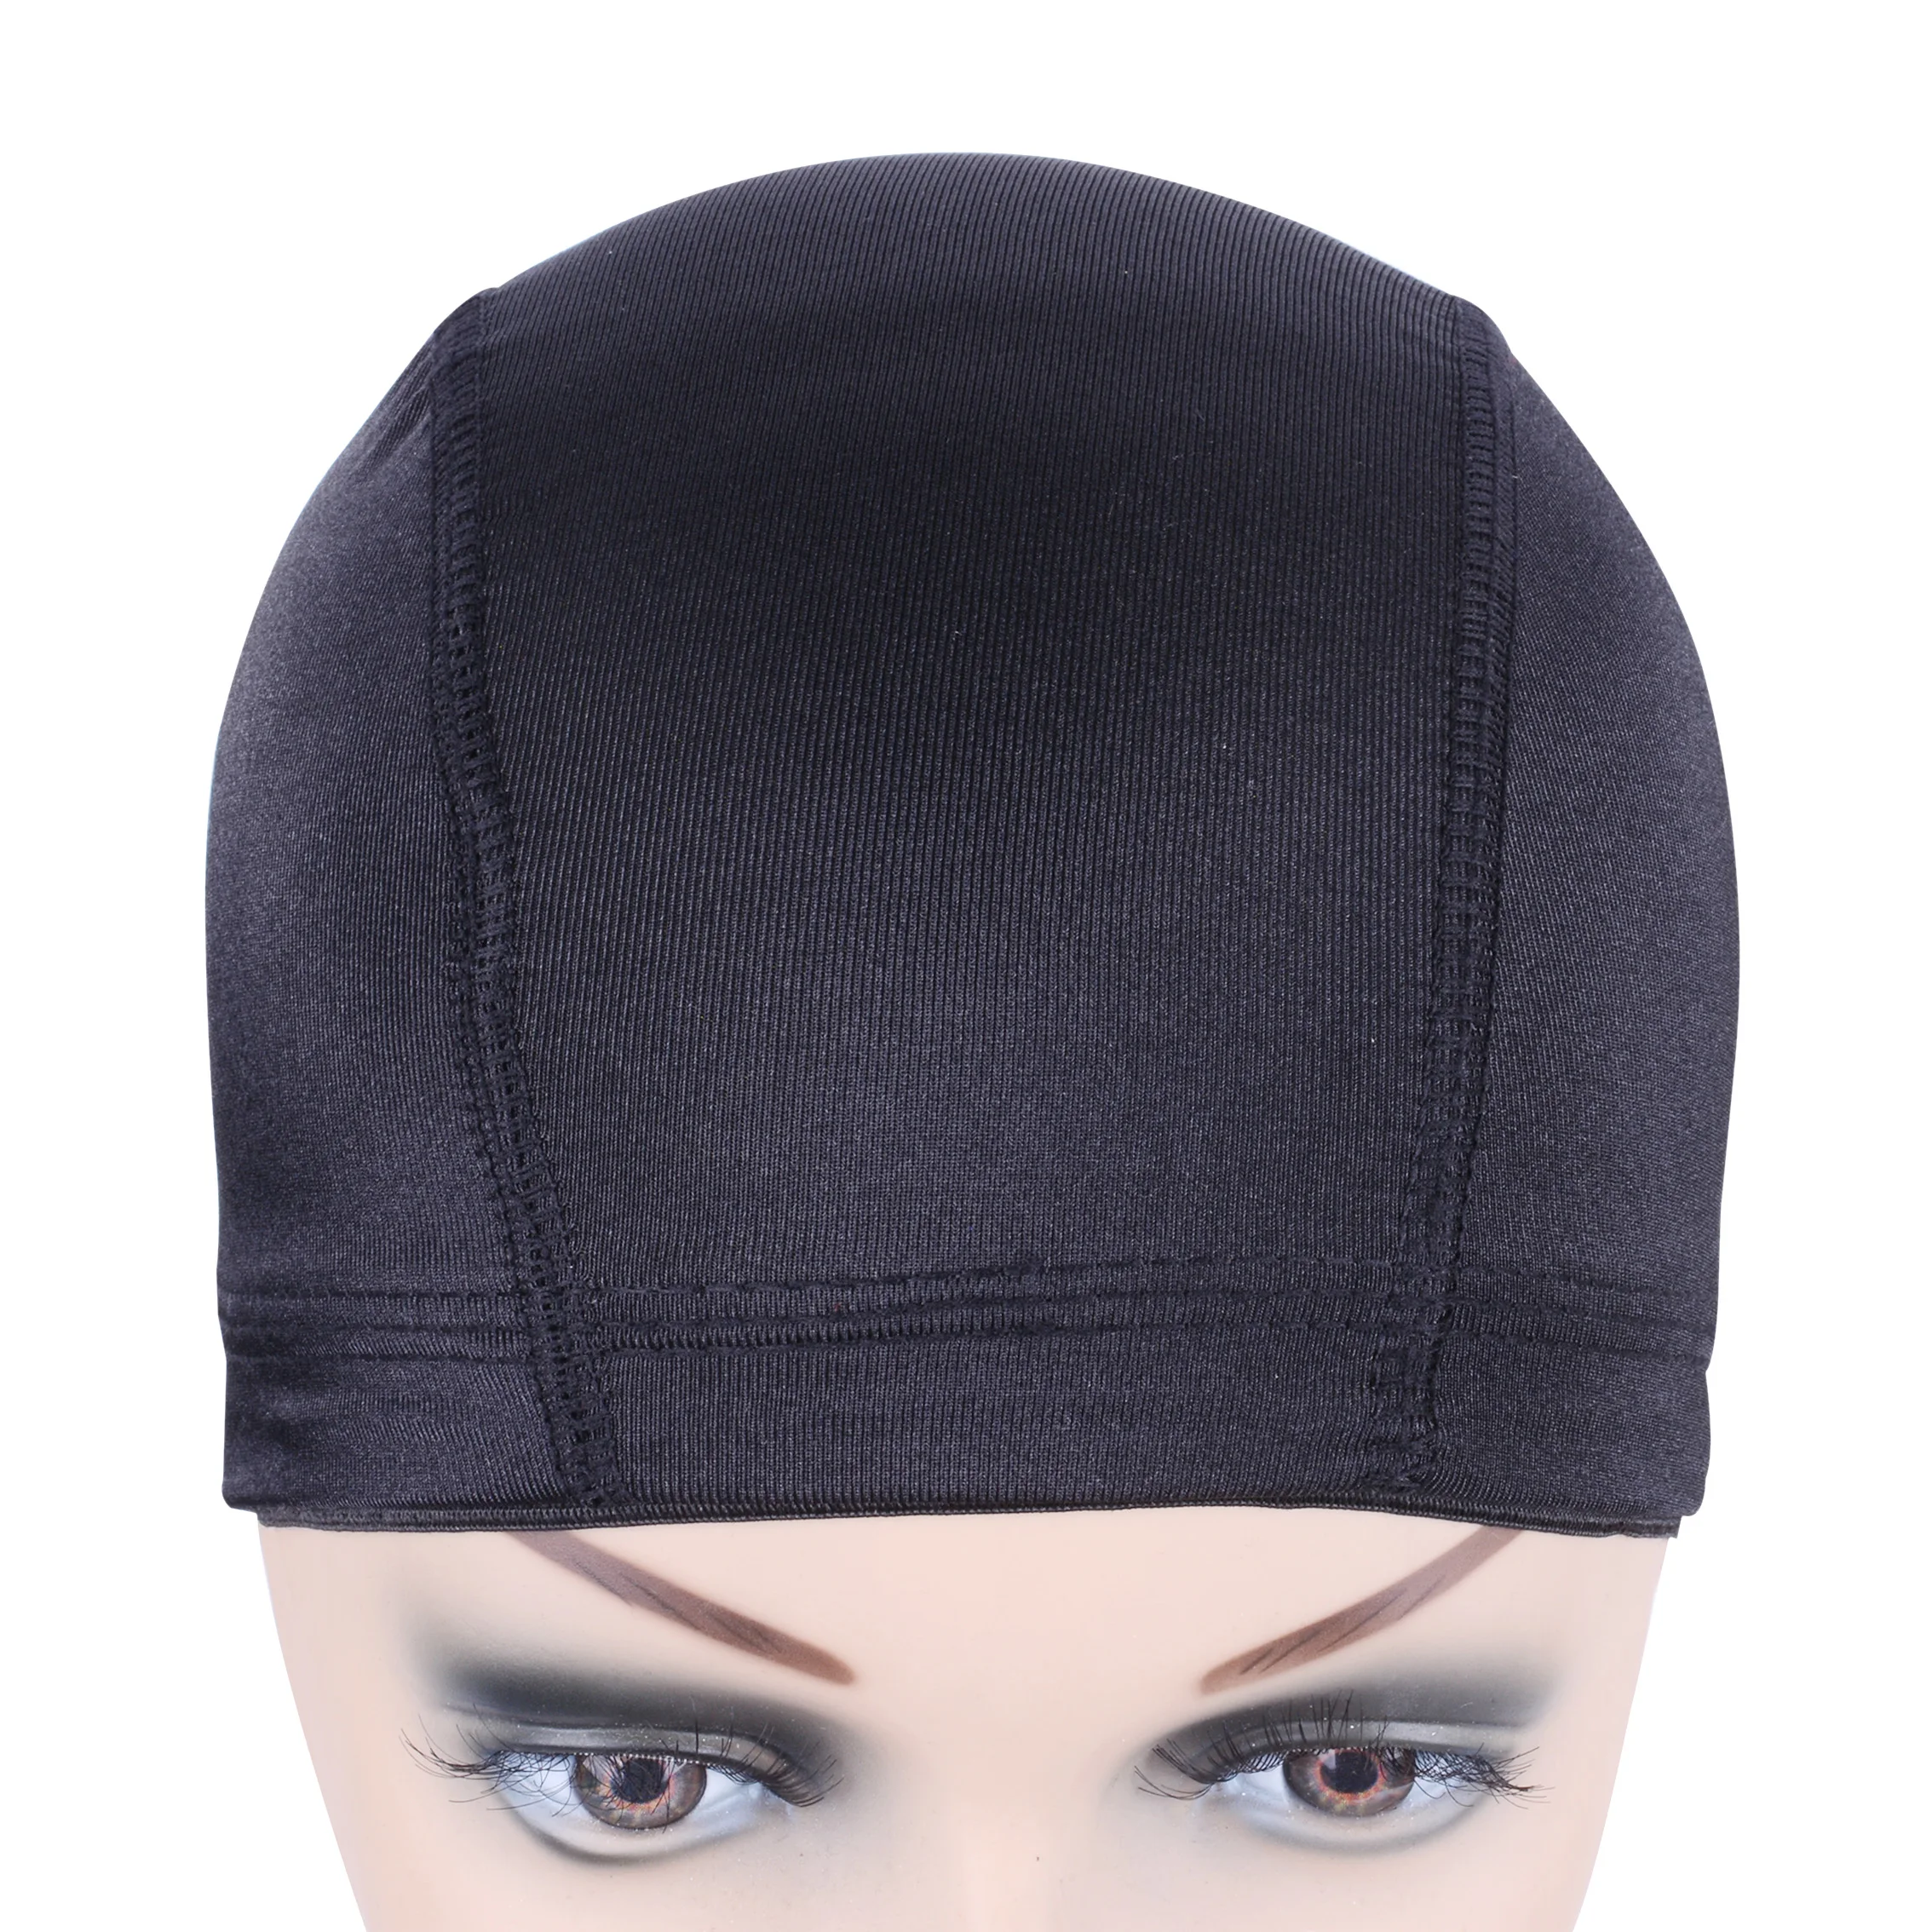 

Hot Sell Glueless Hair Net Liner Cheap Wig Caps For Making Wigs Spandex Net Elastic Dome Wig Cap